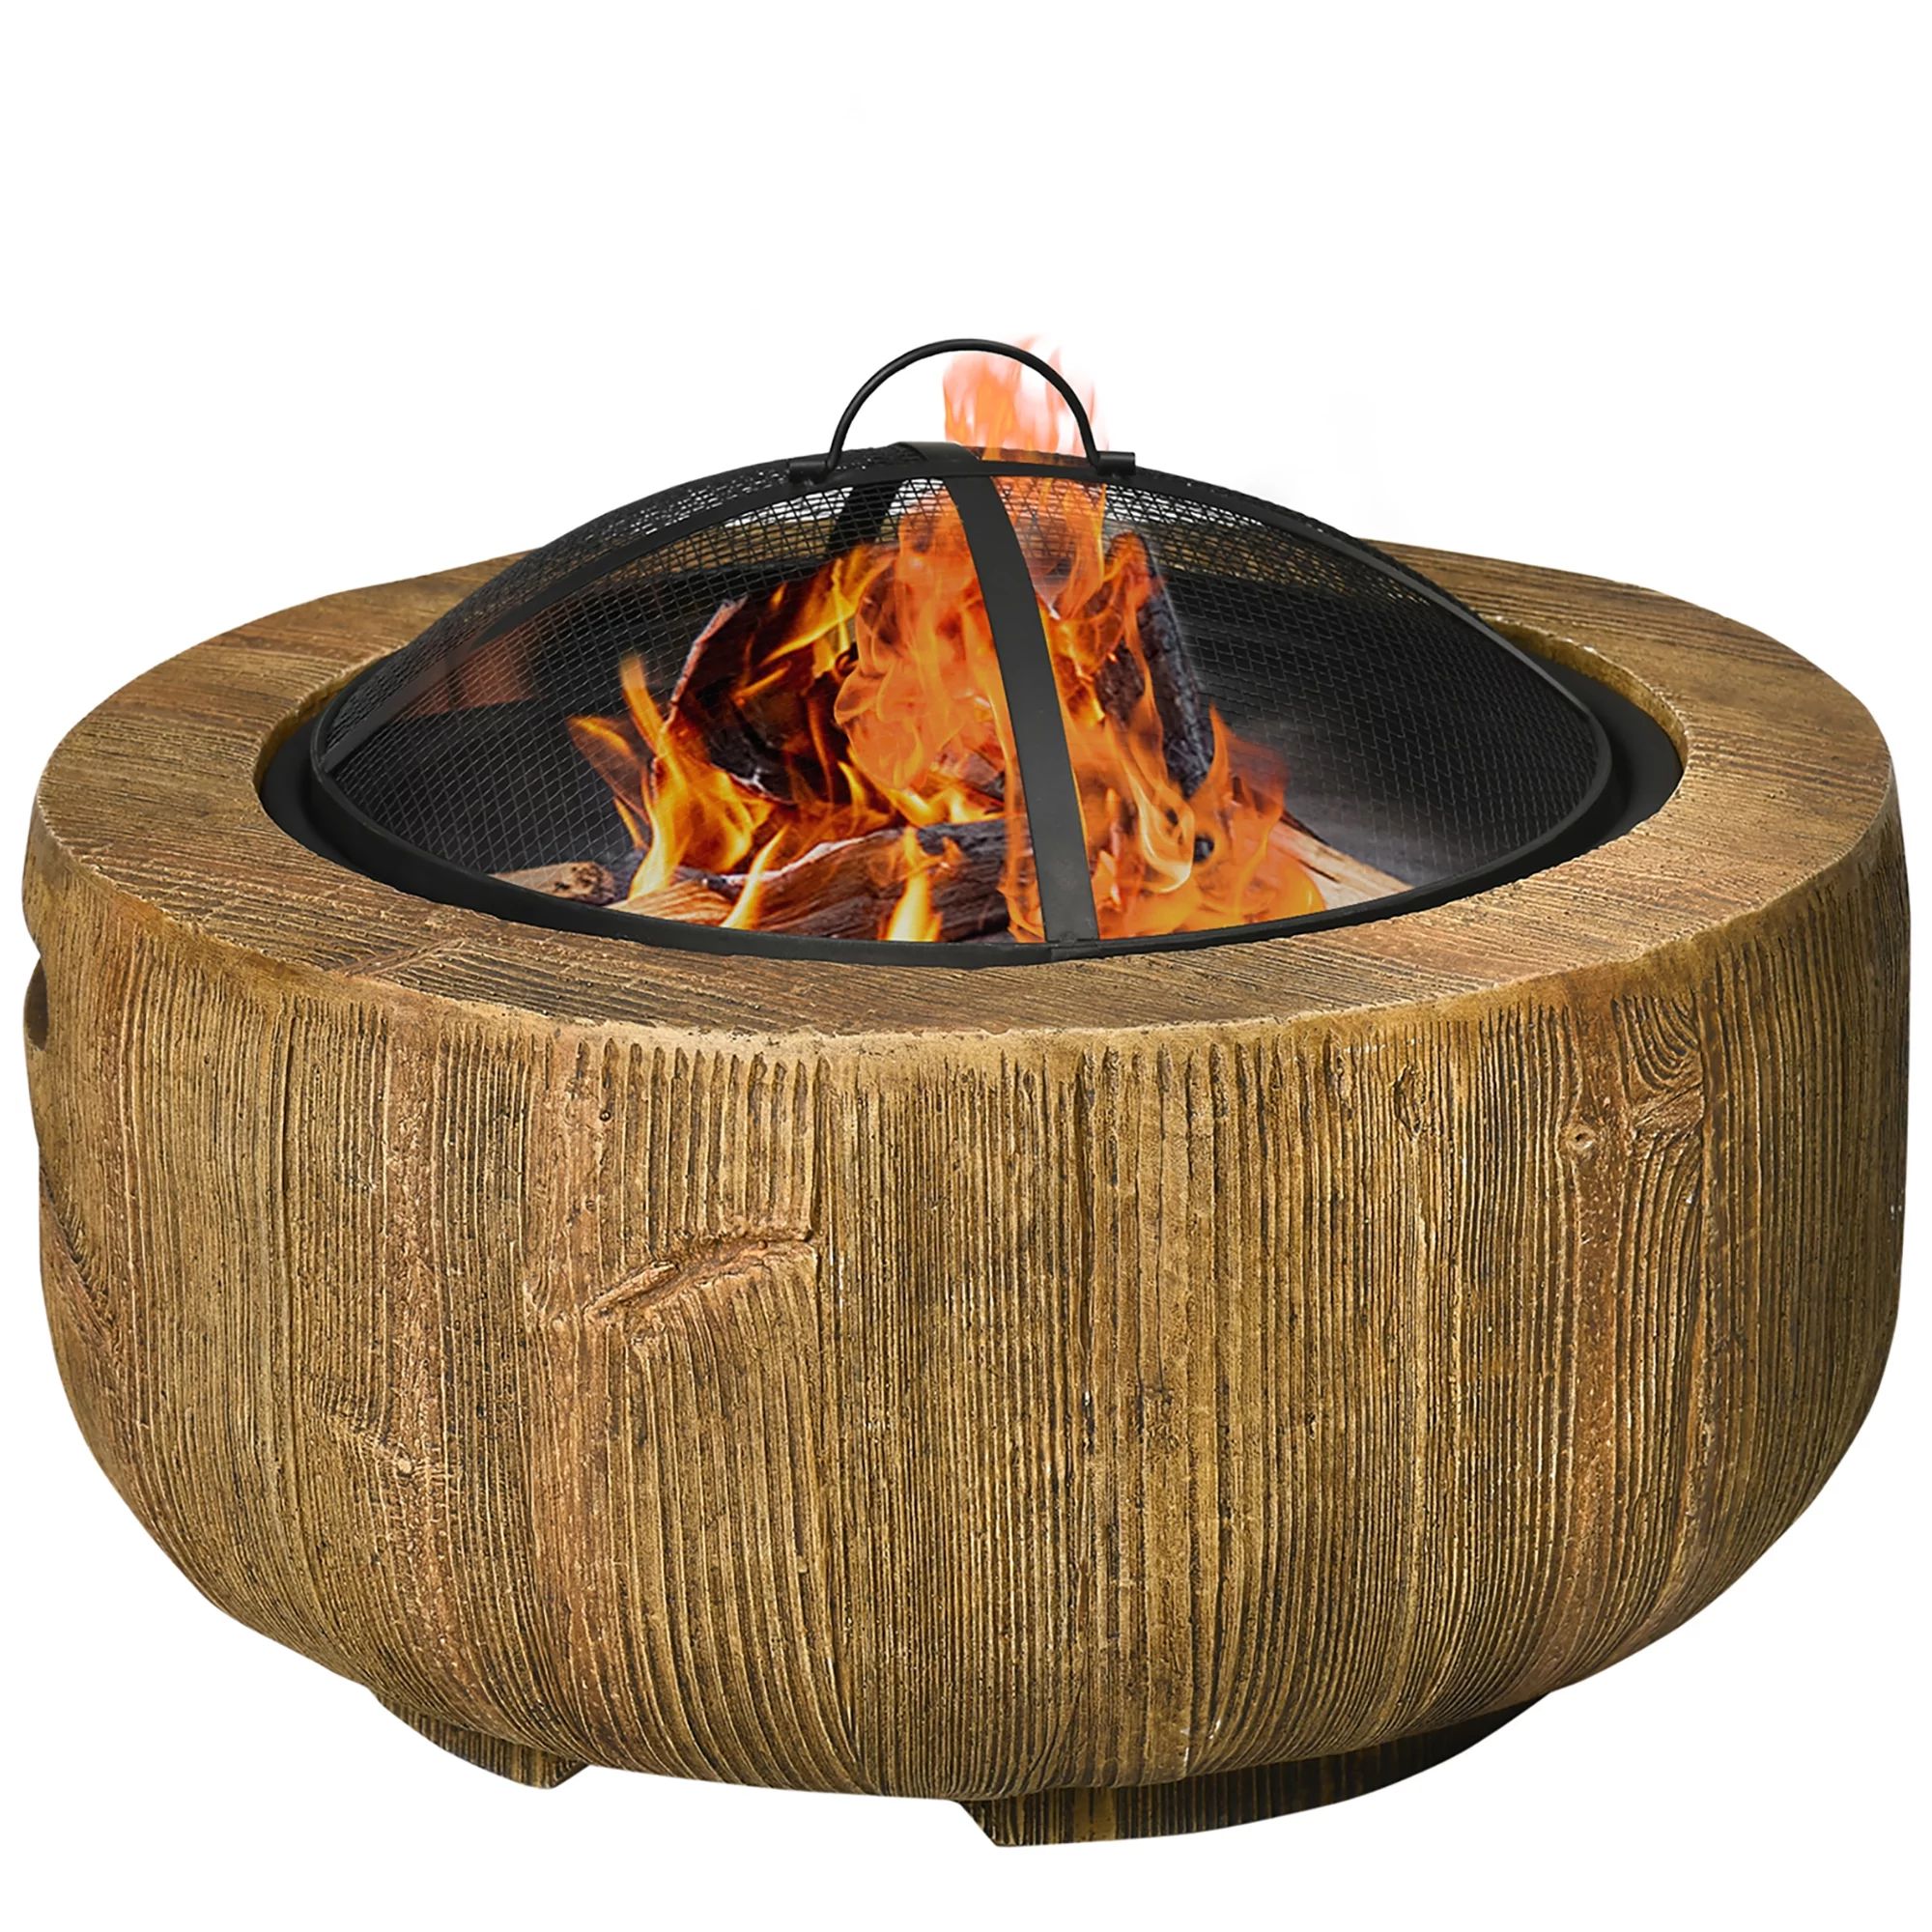 Outsunny Outdoor Fire Pit, 24 Inch Metal Wood Burning Fireplace with Spark Cover, Poker, Woodgrai... | Walmart (US)